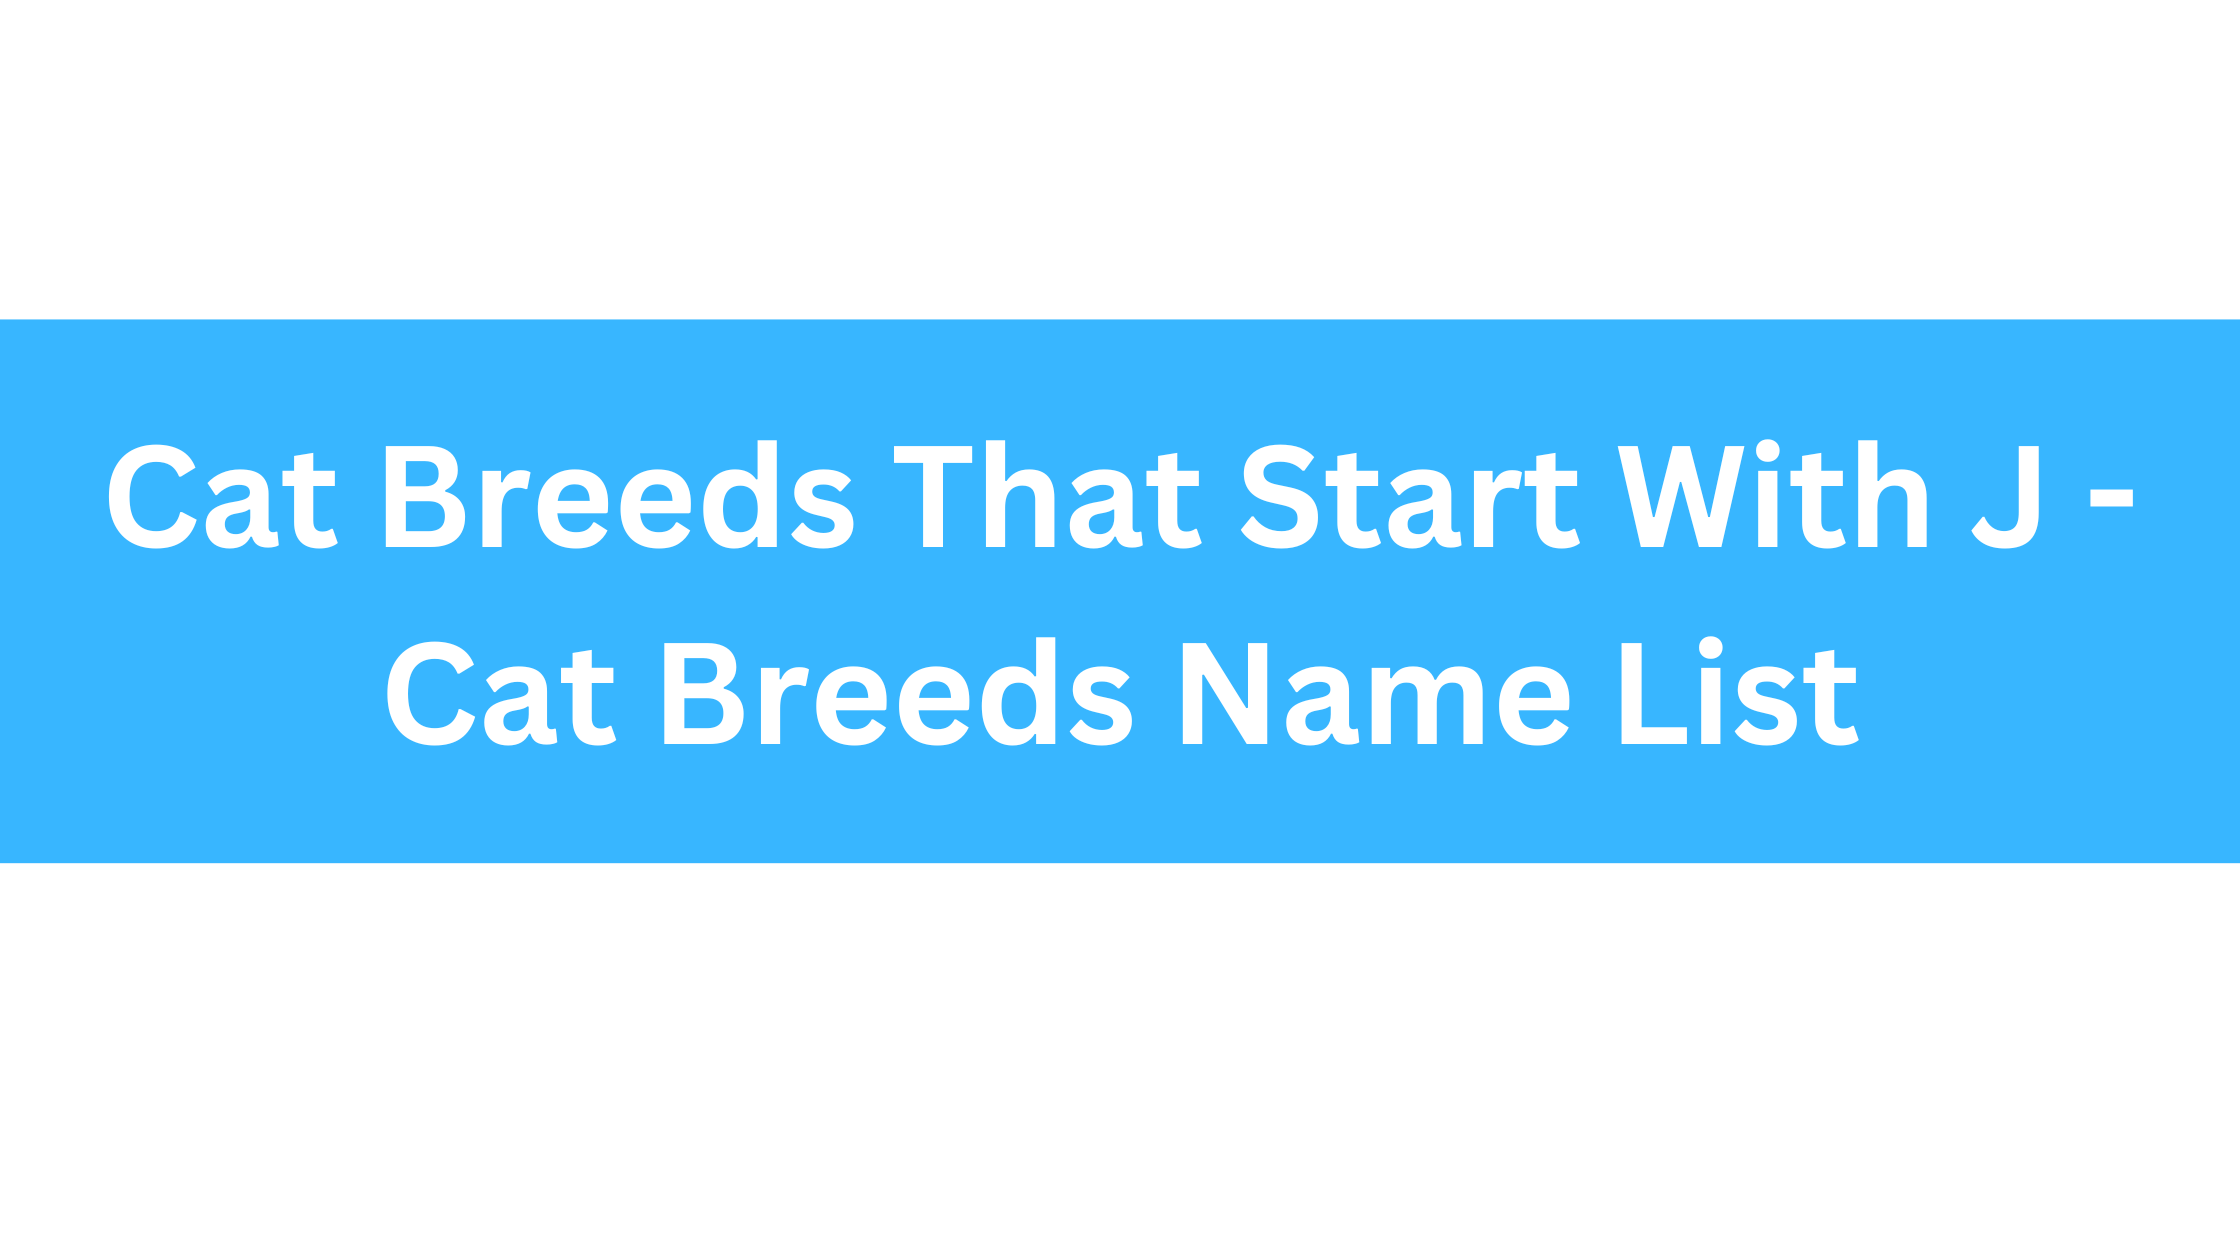 Cat Breeds That Start With J